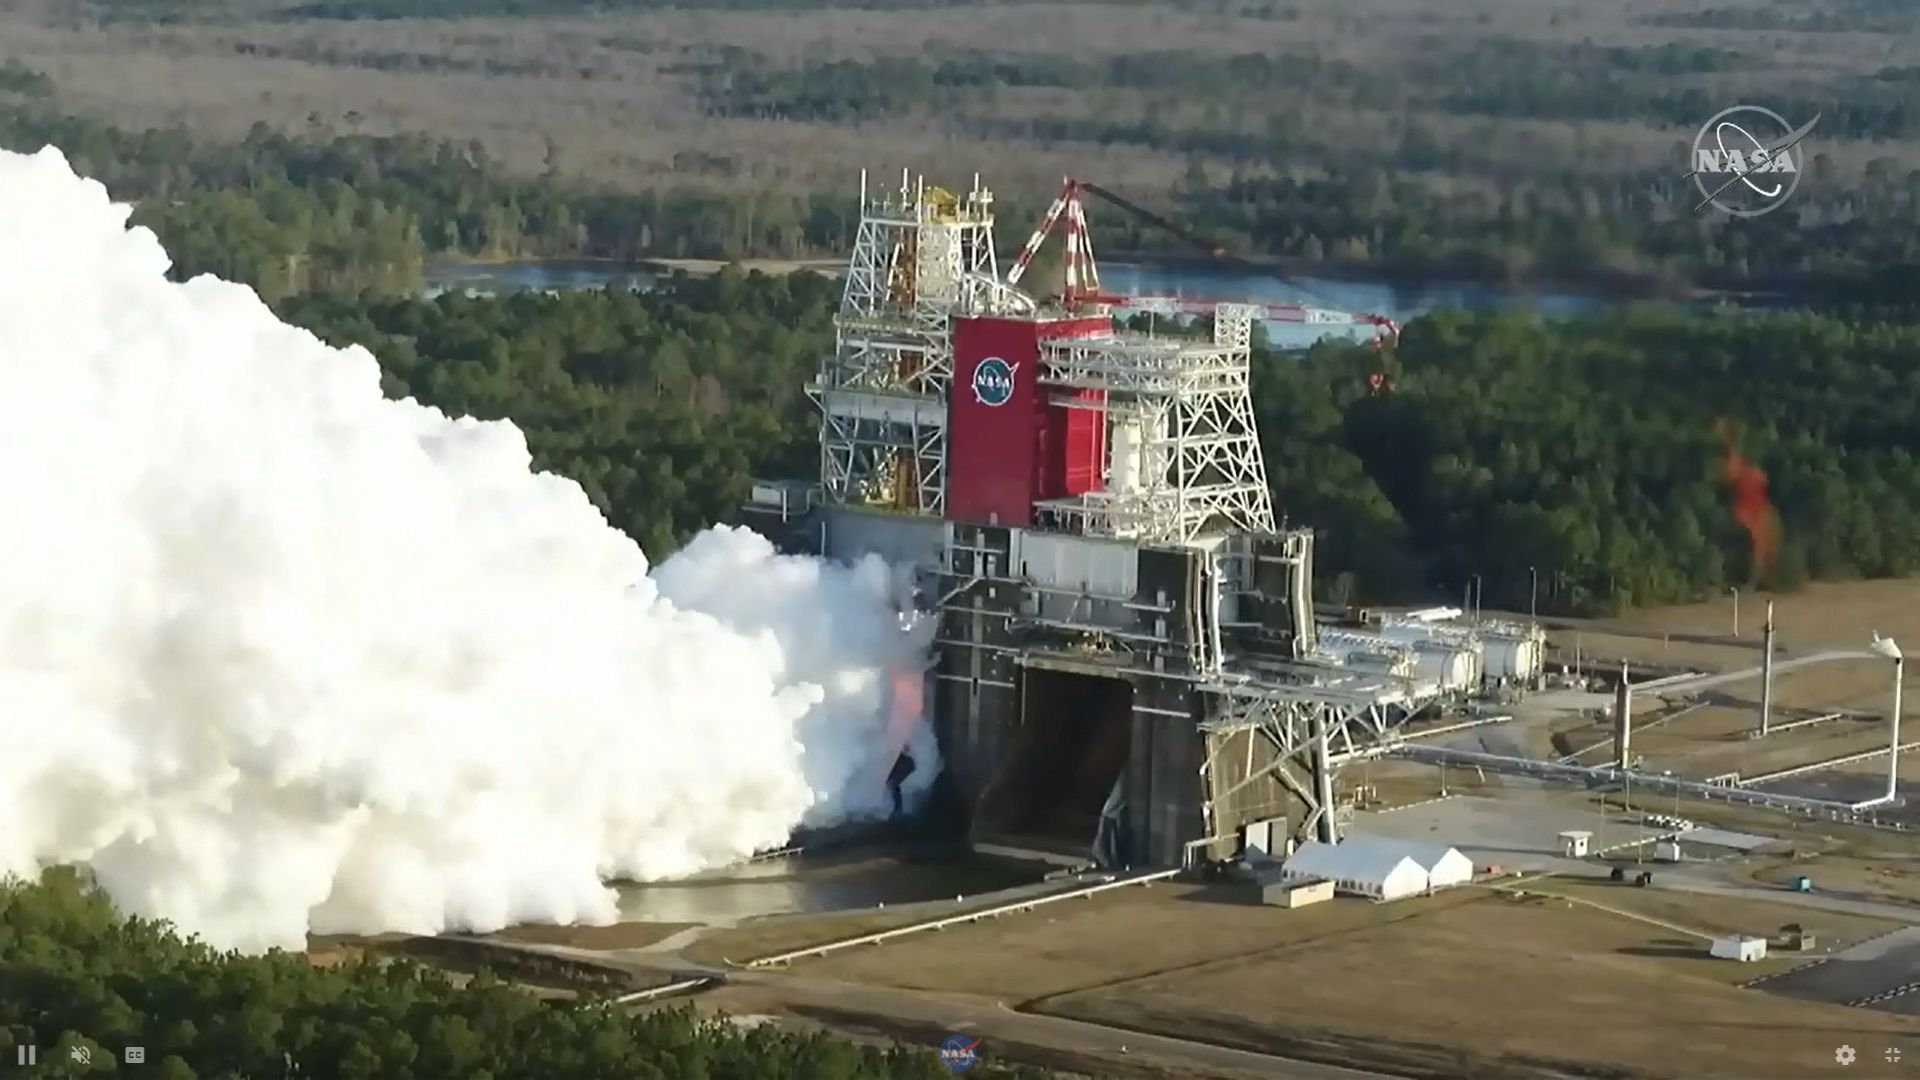 NASA Seeks Cause to Early End of SLS Moon Rocket Green Run Hot Fire Test